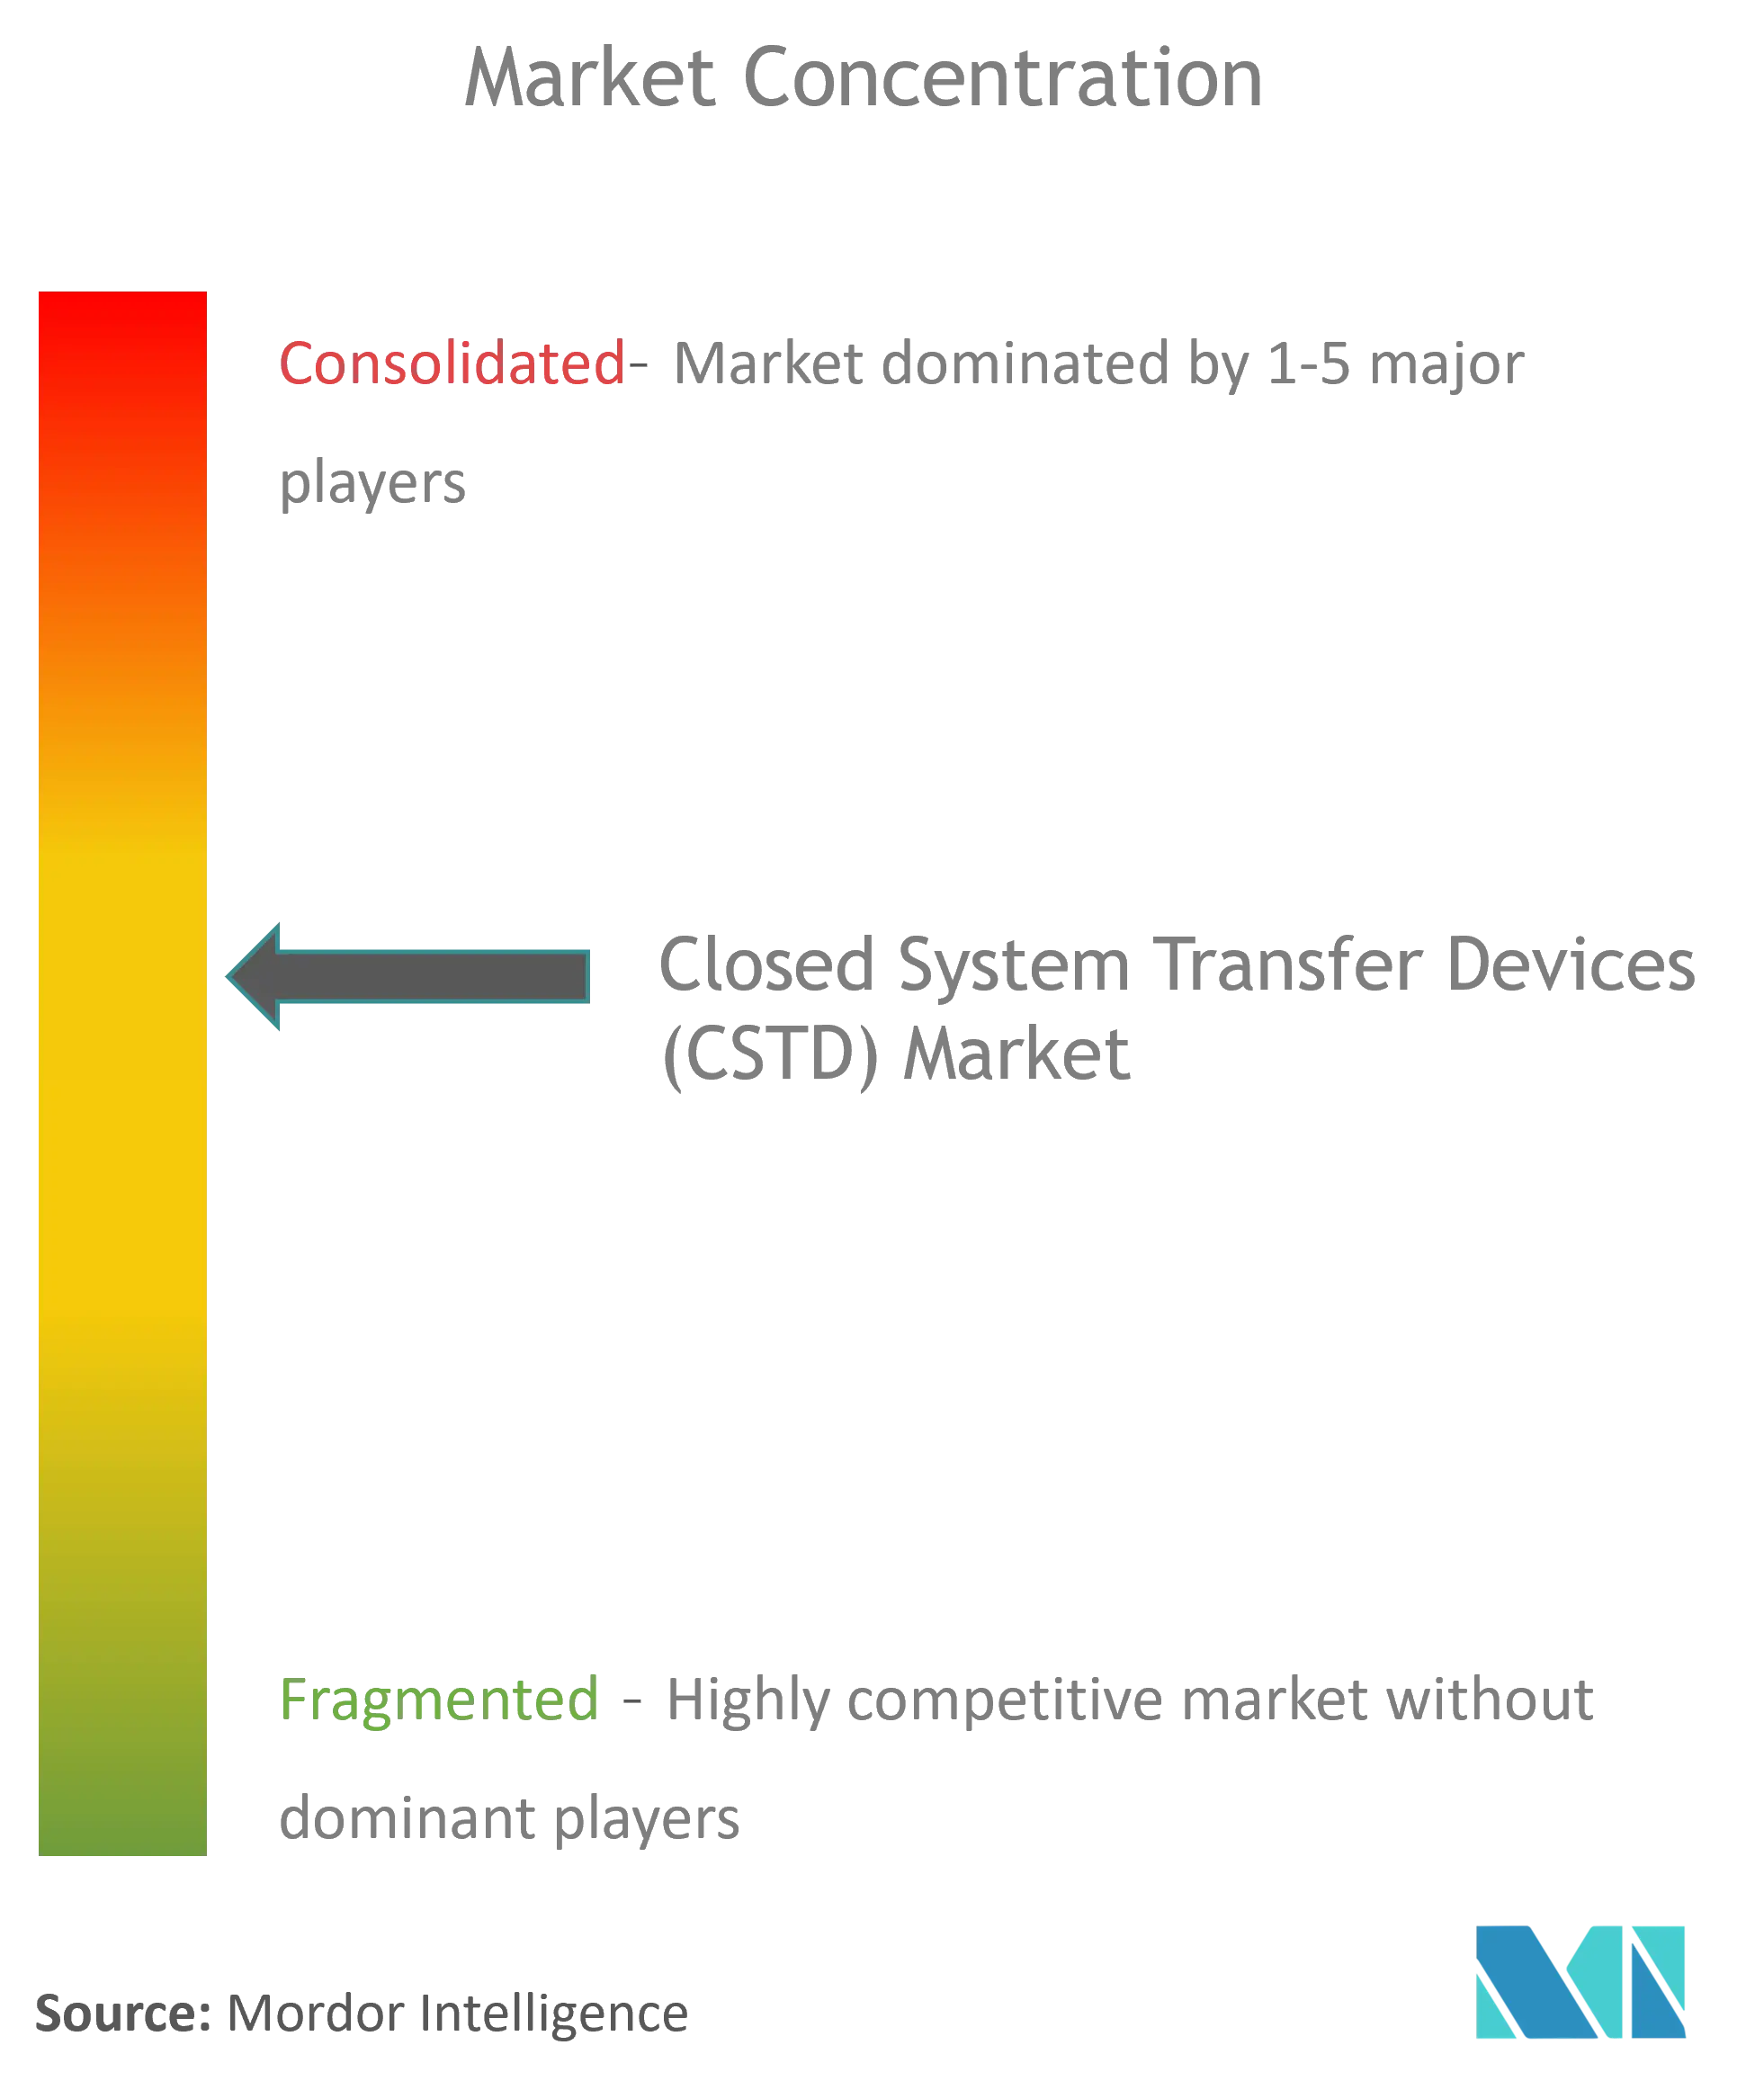 Closed System Transfer Devices (CSTD) Market.png